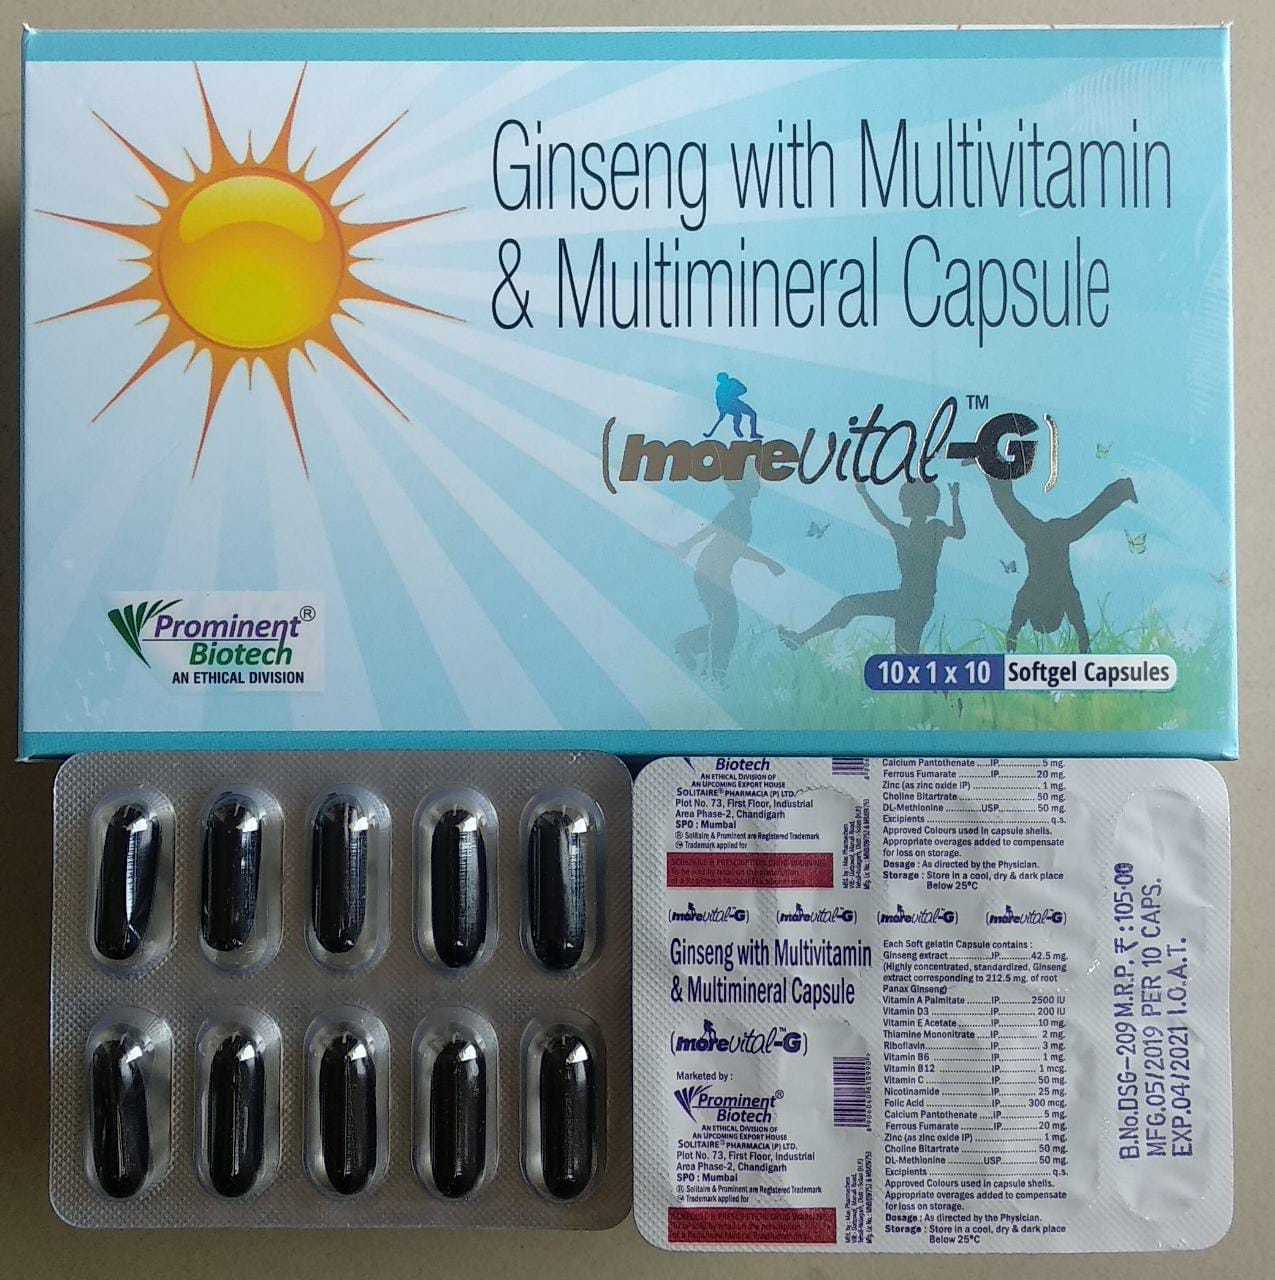 Antioxidants with Ginseng,Multivitamins & Multiminerals